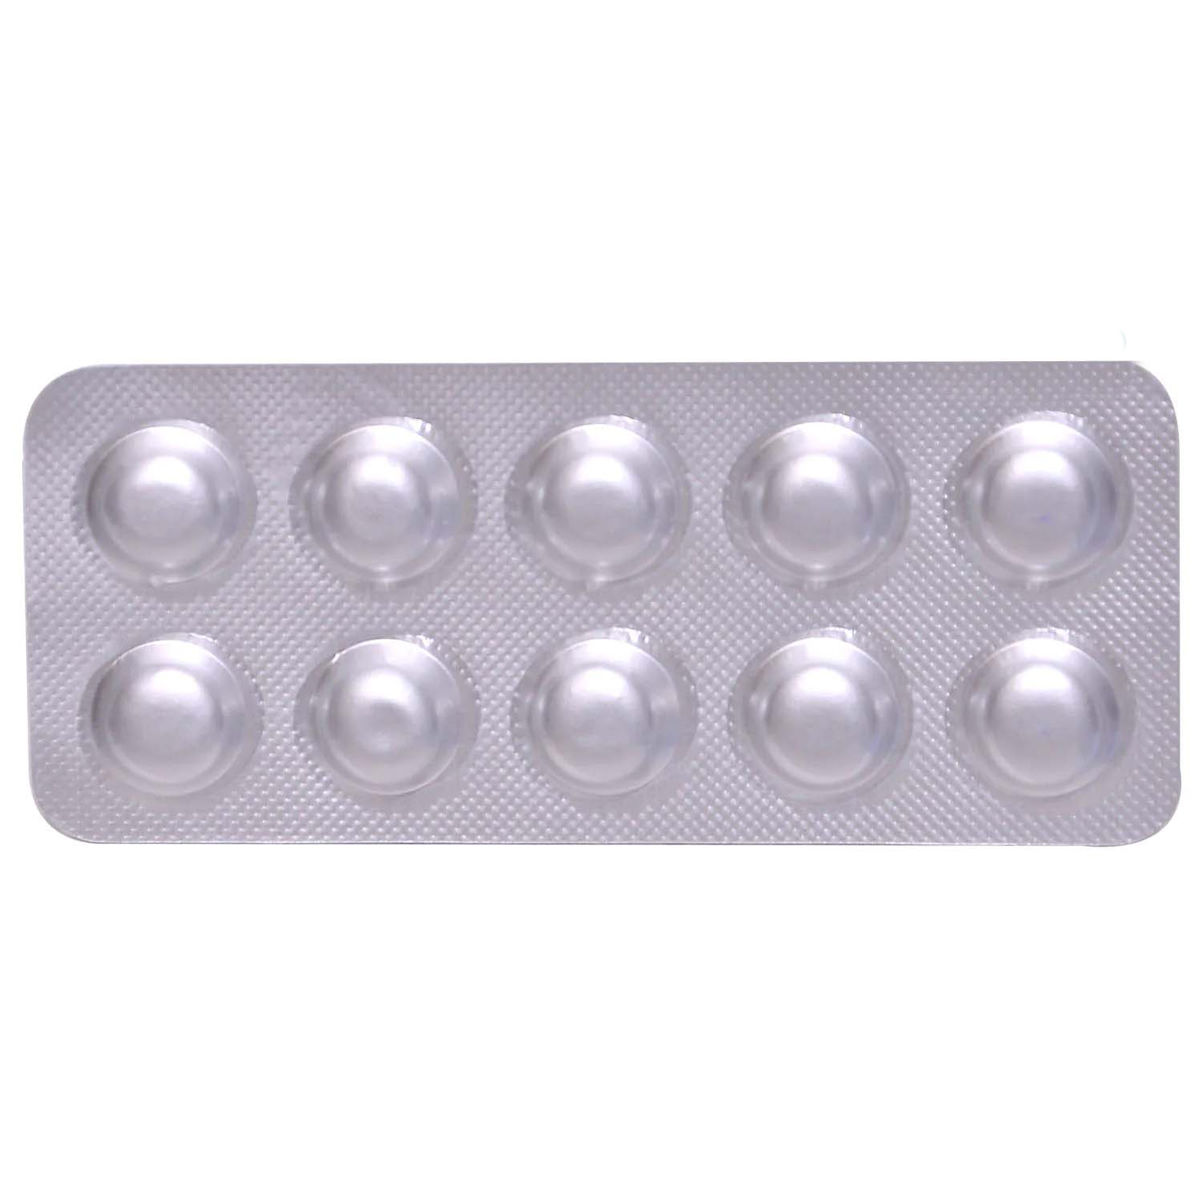 TACTILE AM TABLET, Pack of 10 TABLETS